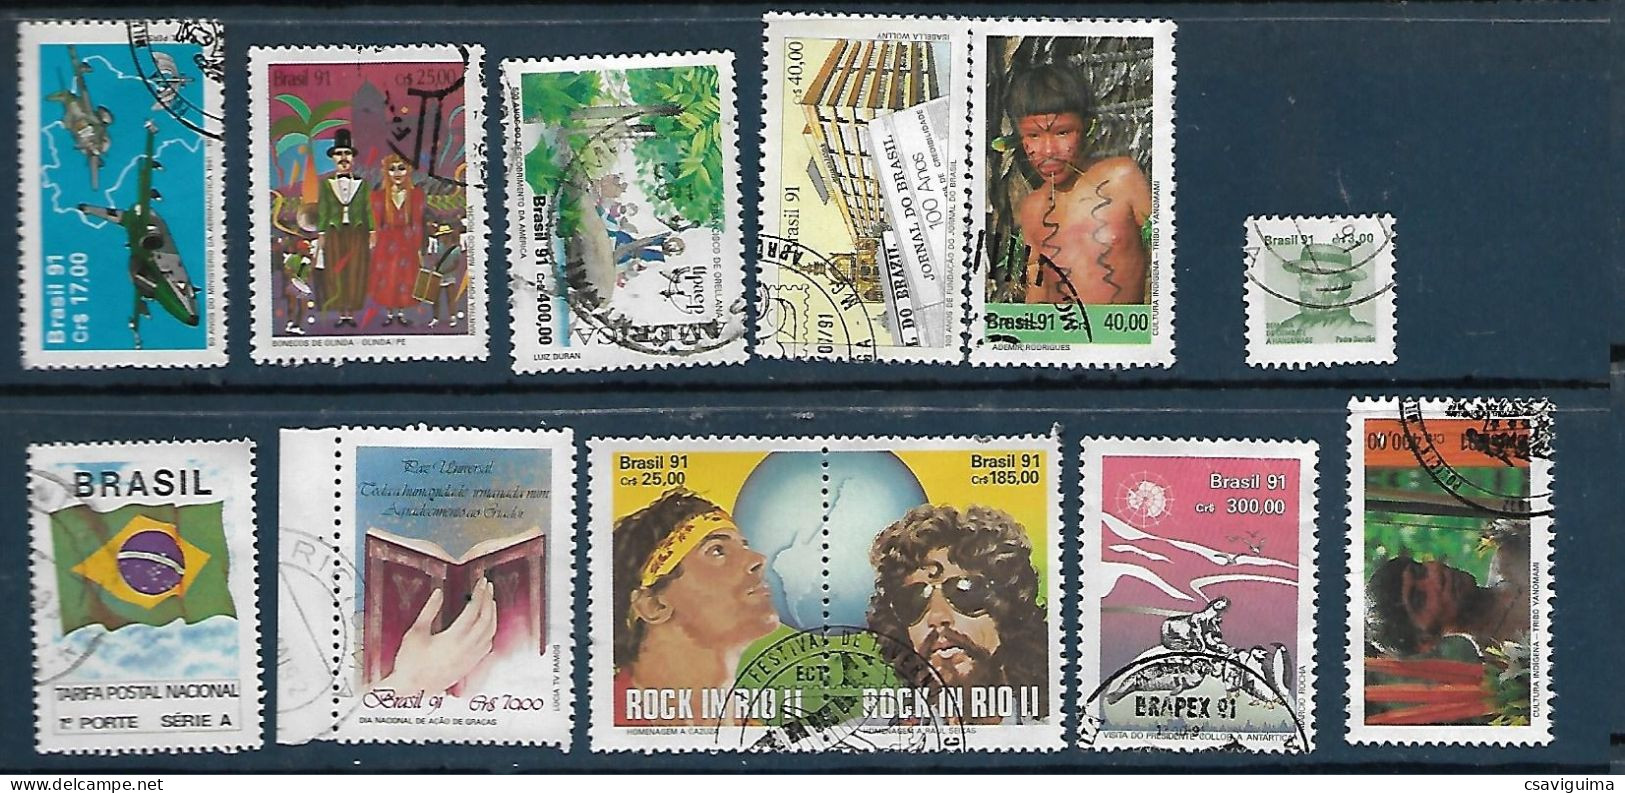 Brasil (Brazil) - 1991 - Set 11 Stamps: Used, Hinged (#10) - Used Stamps